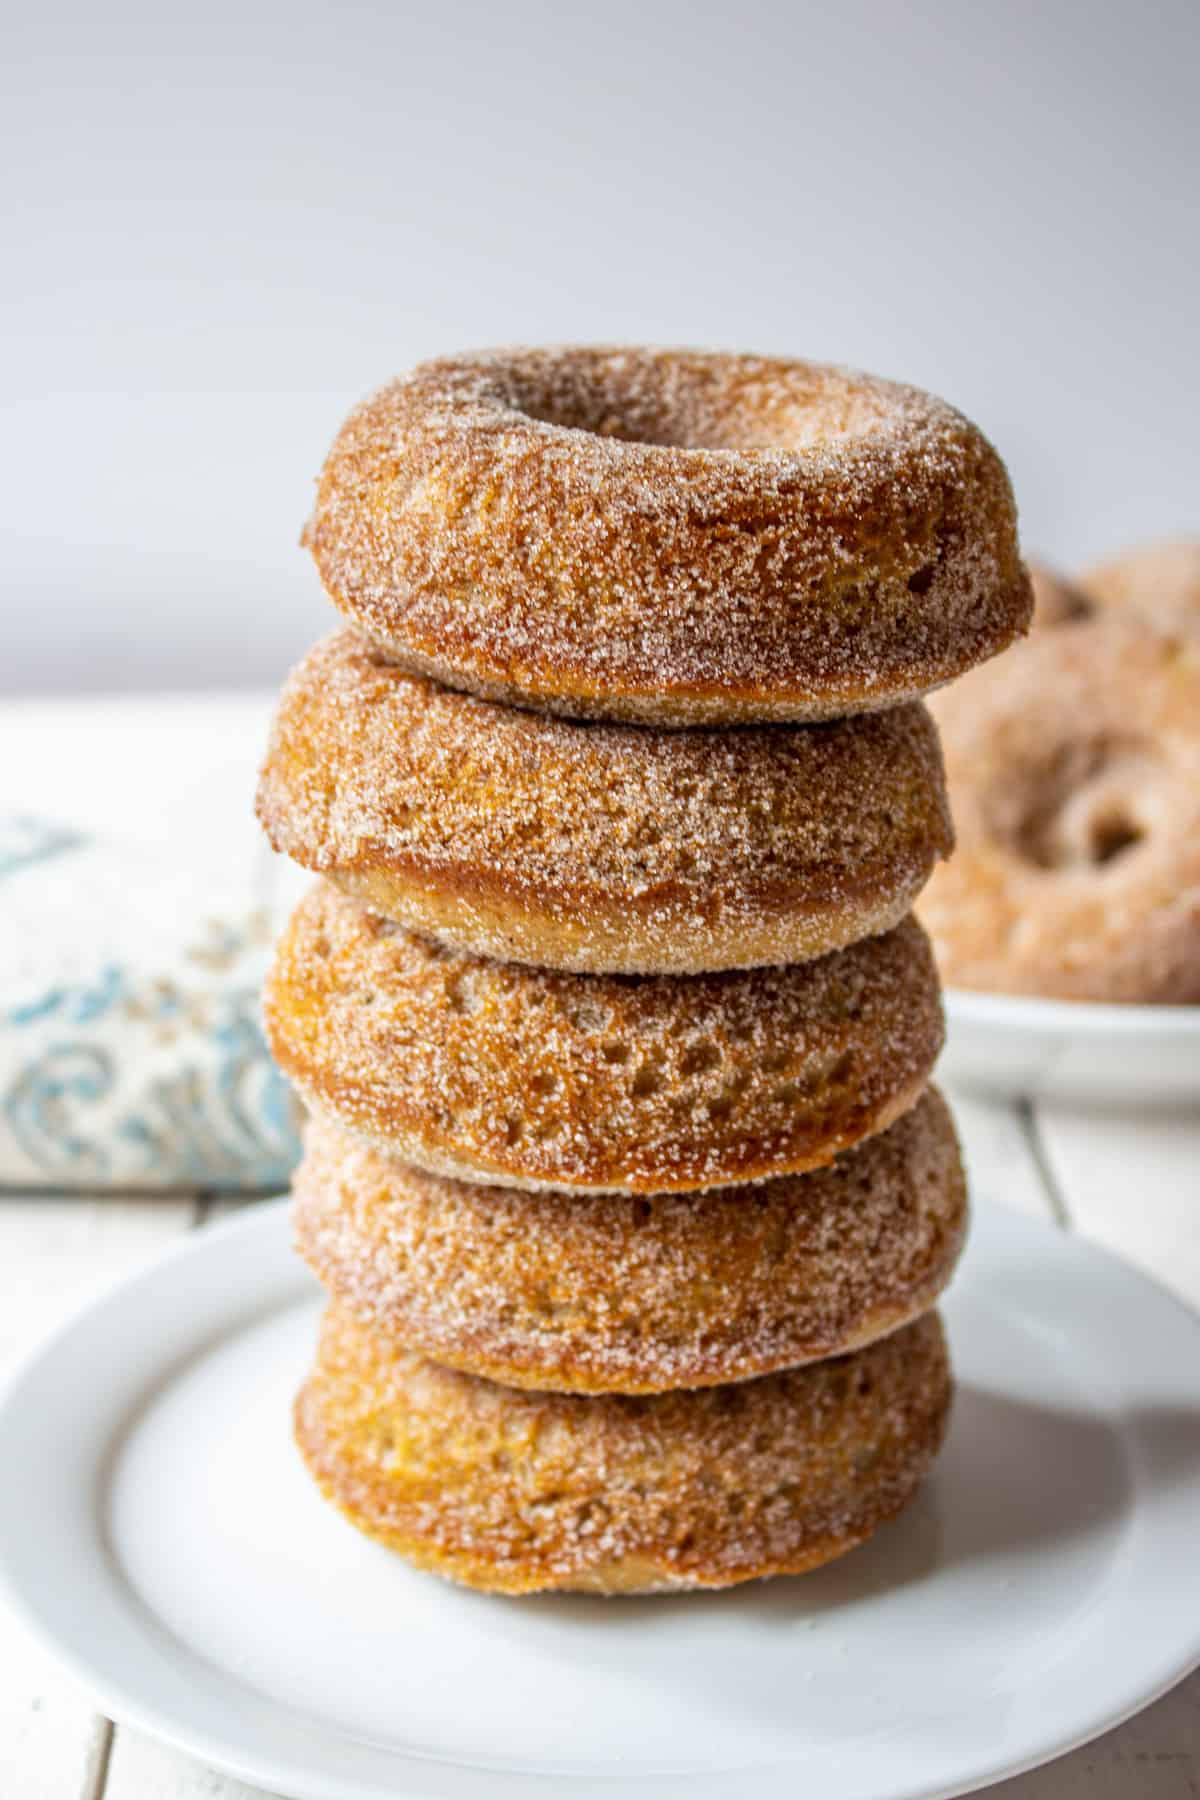 A stack of baked donuts.